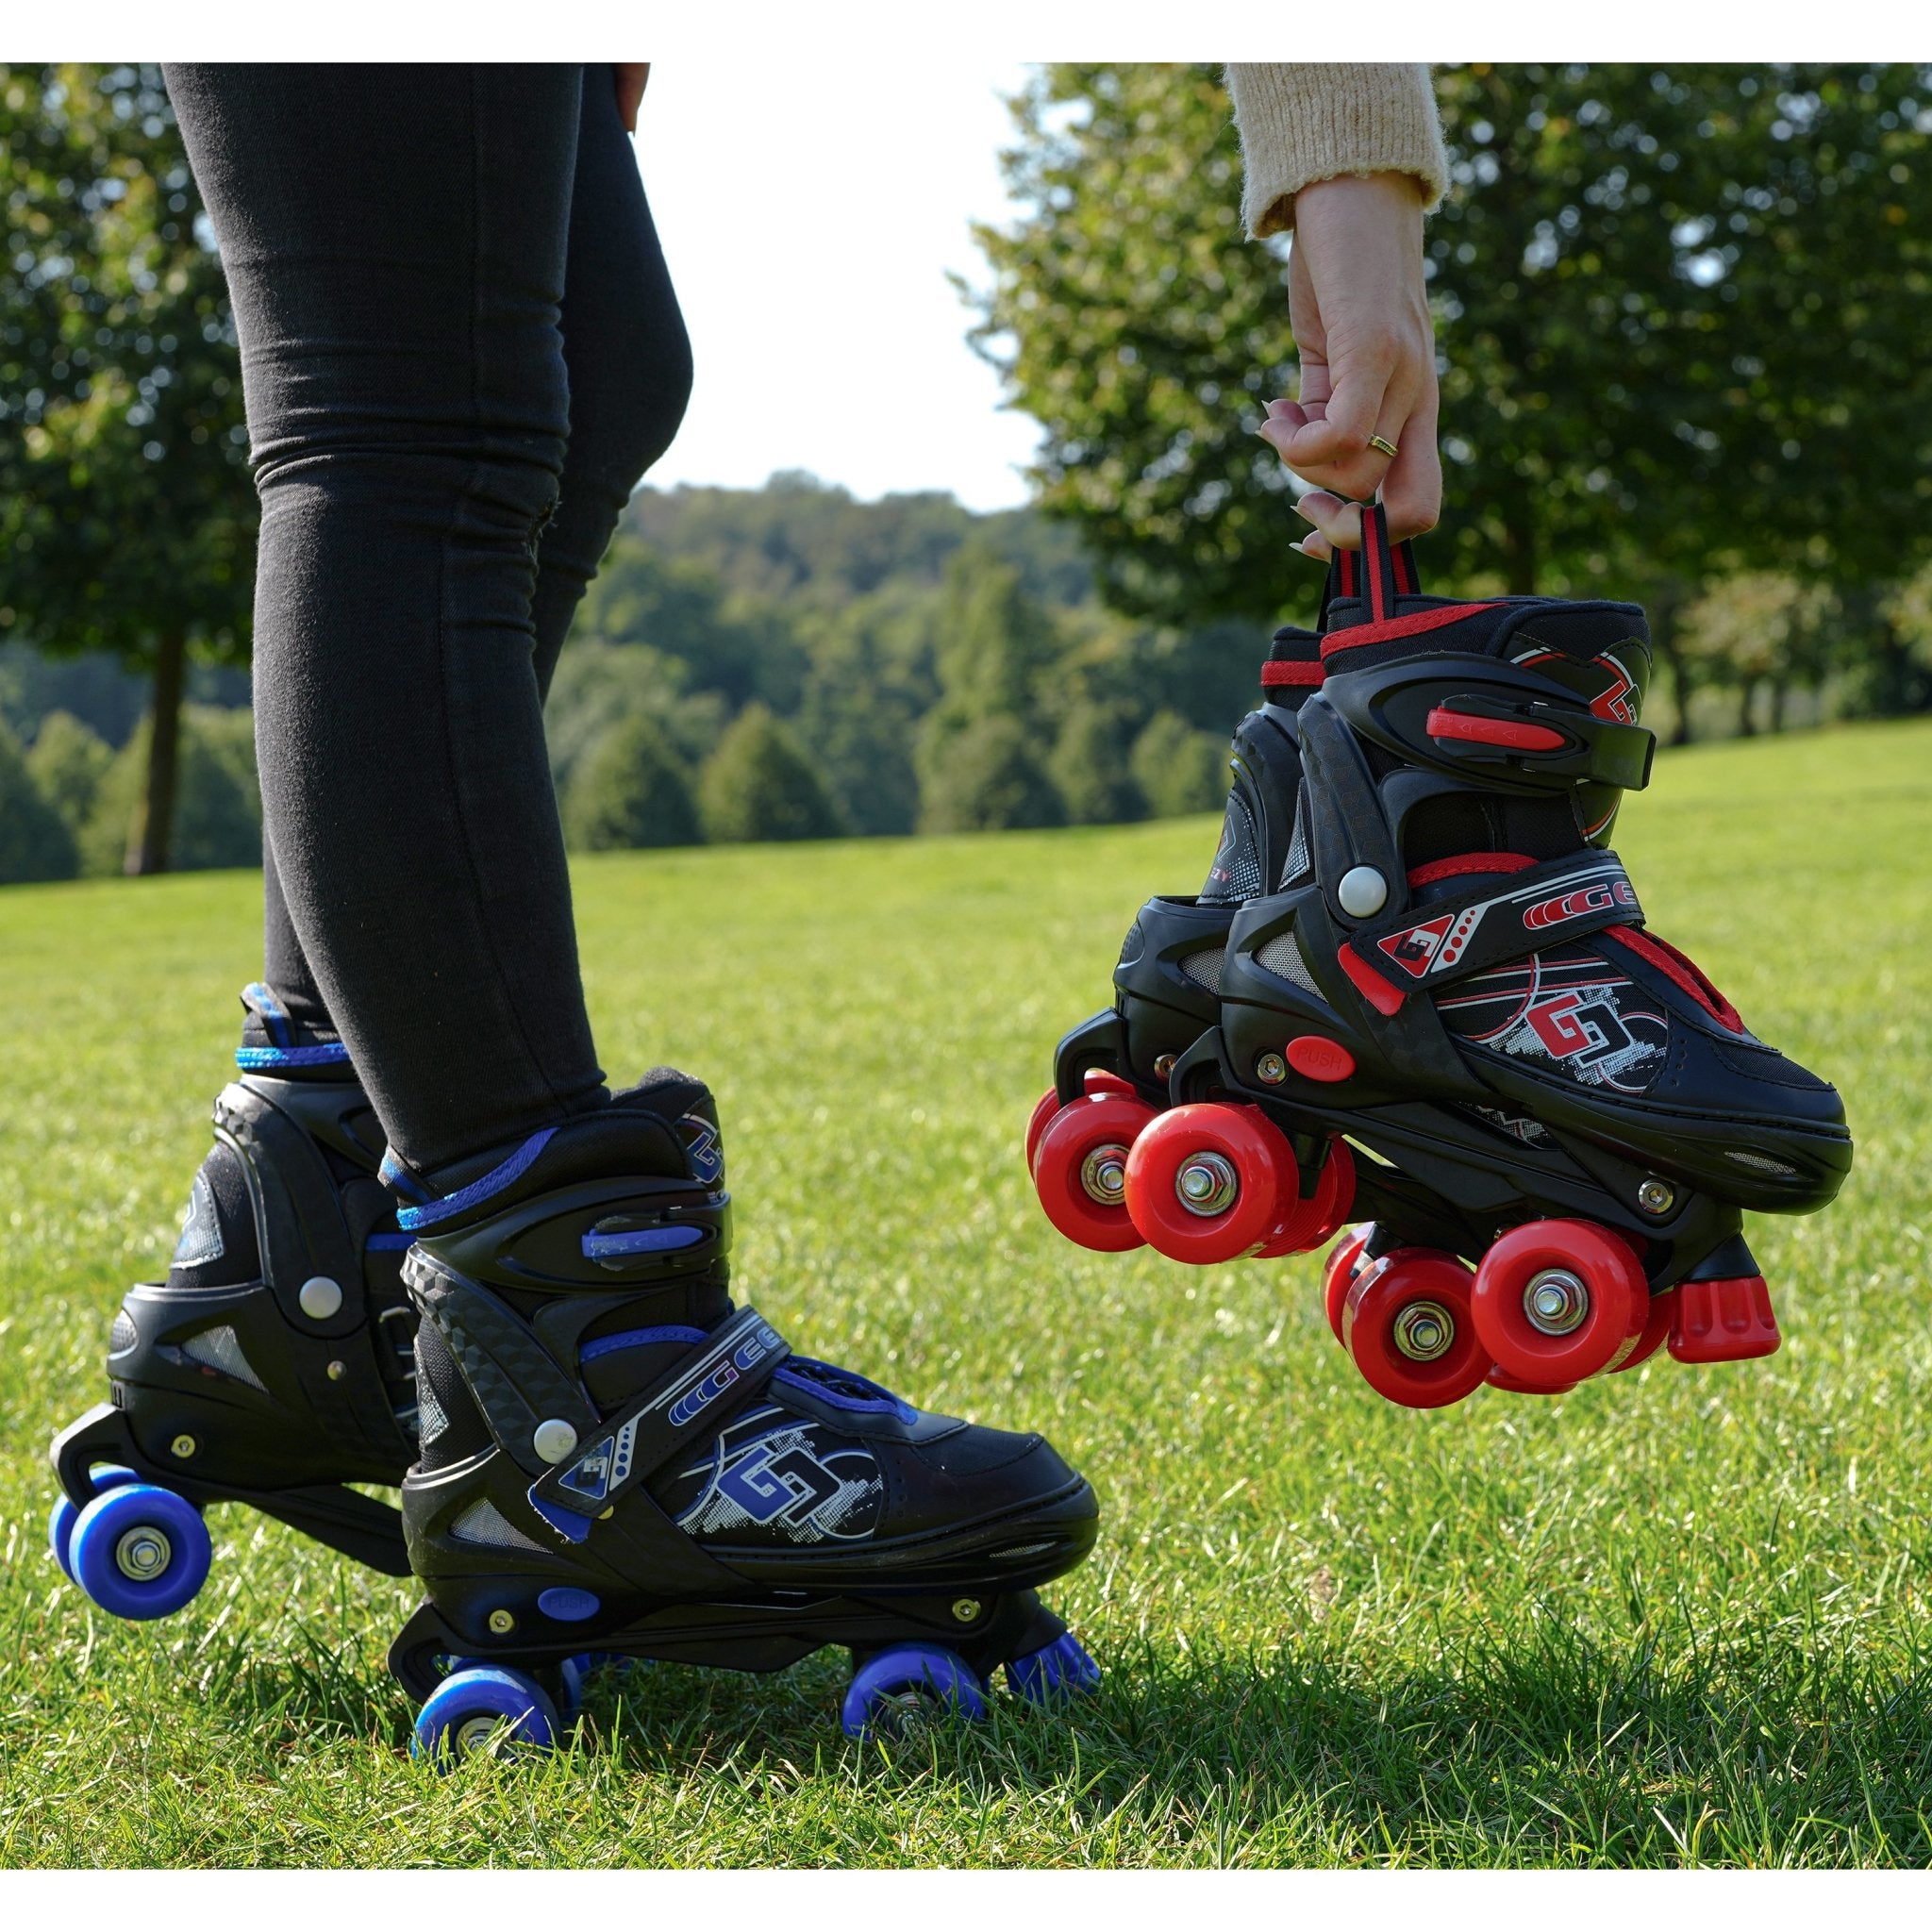 Red and Black Roller Skates for Kids with 4 Wheel The Magic Toy Shop - The Magic Toy Shop